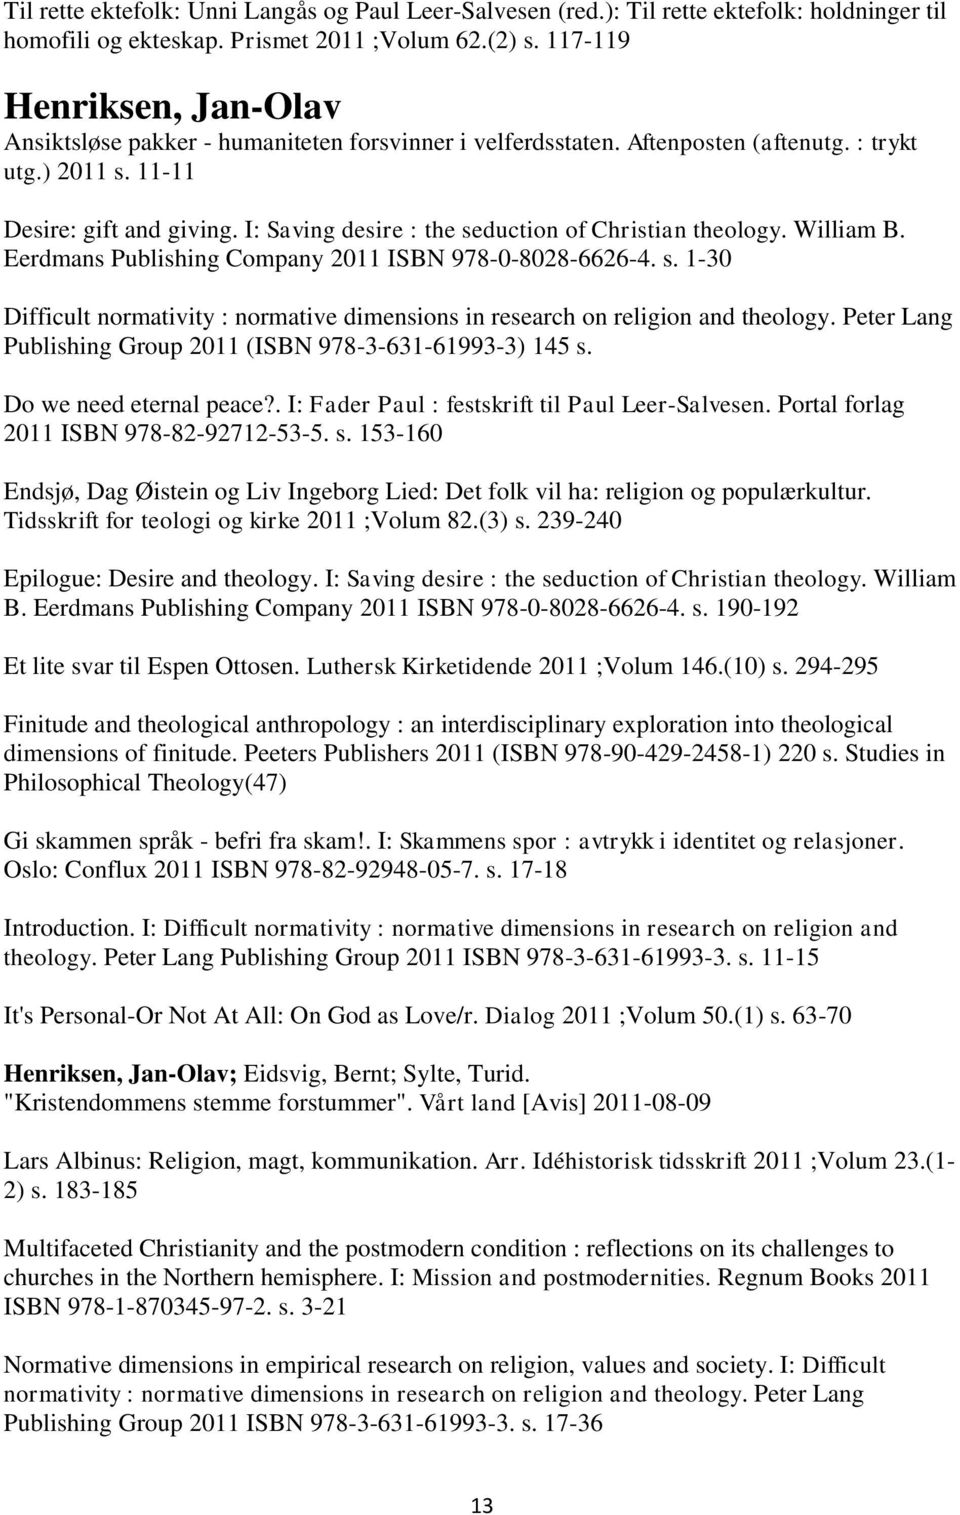 I: Saving desire : the seduction of Christian theology. William B. Eerdmans Publishing Company 2011 ISBN 978-0-8028-6626-4. s. 1-30 Difficult normativity : normative dimensions in research on religion and theology.